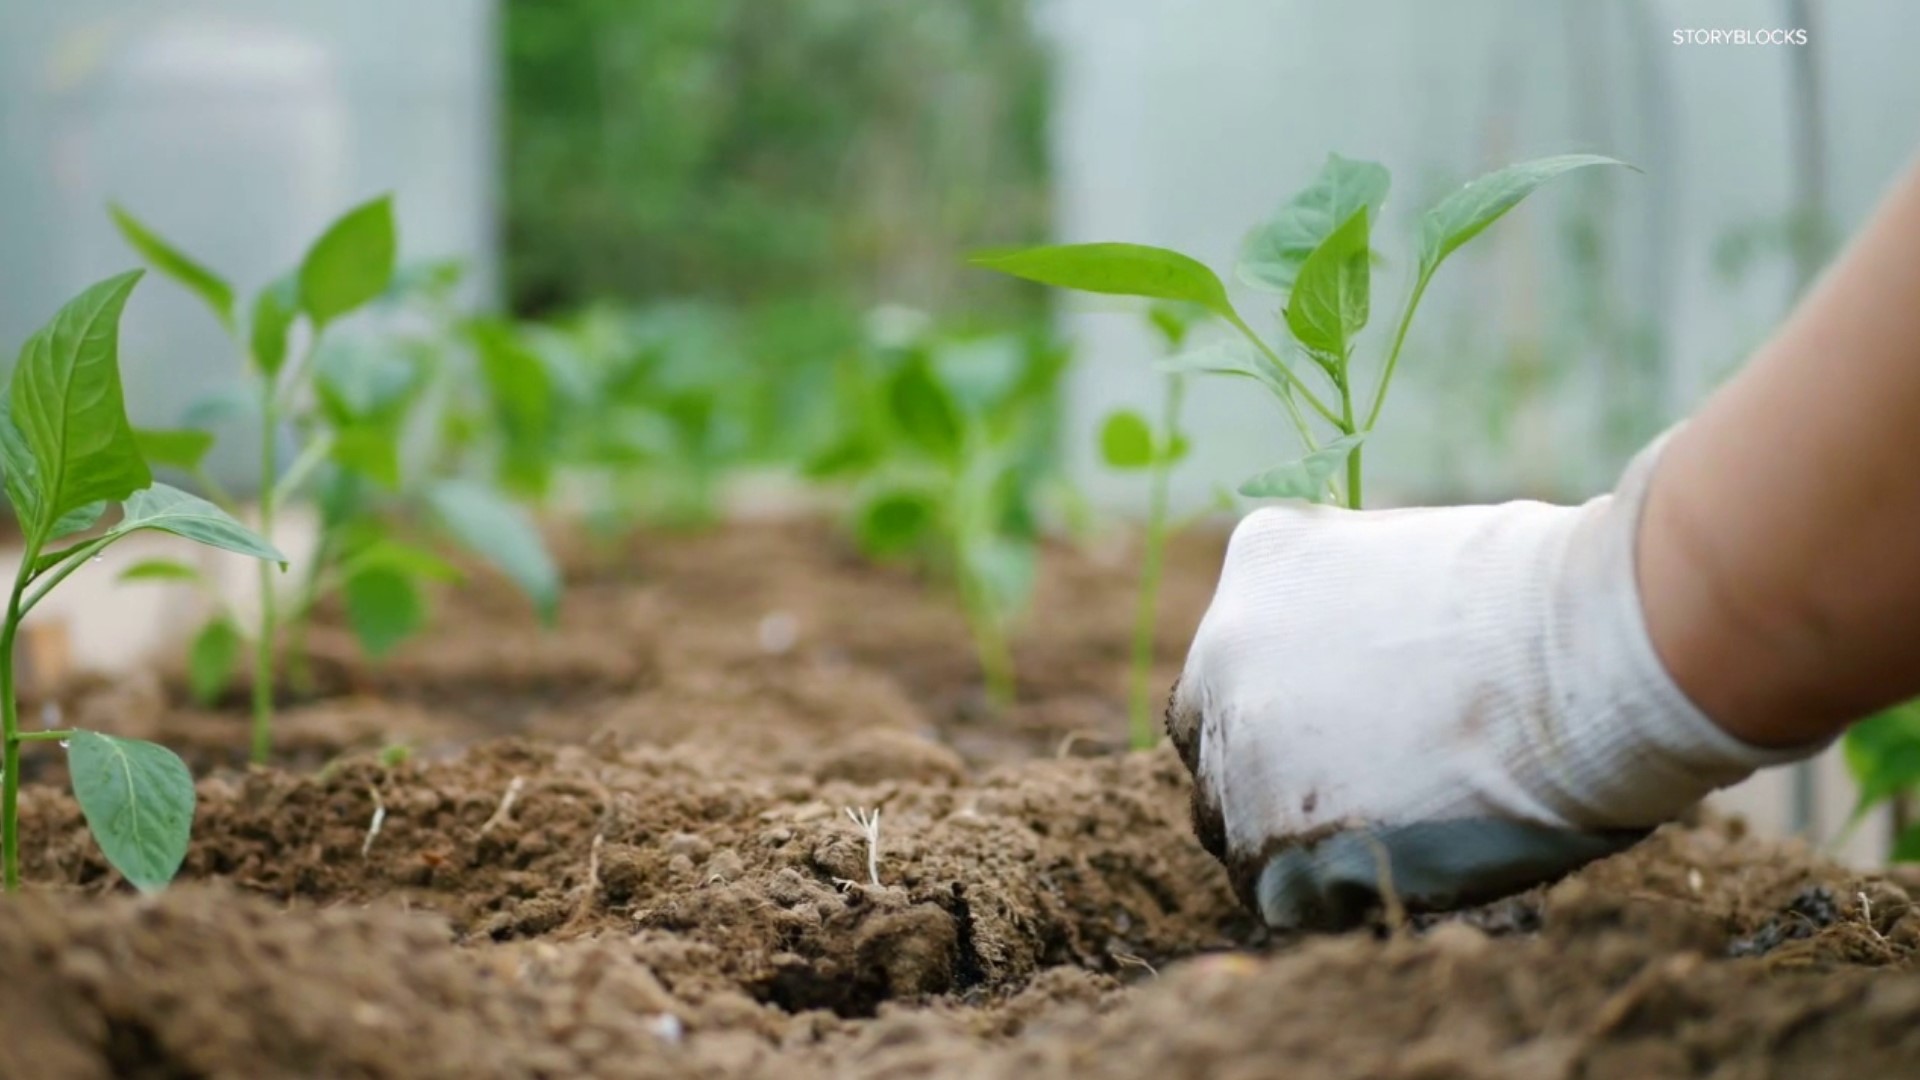 Love fresh fruits and veggies? Here's something we can all dig into. It's National Gardening Day, and if you're struggling with how to get started, help is here.